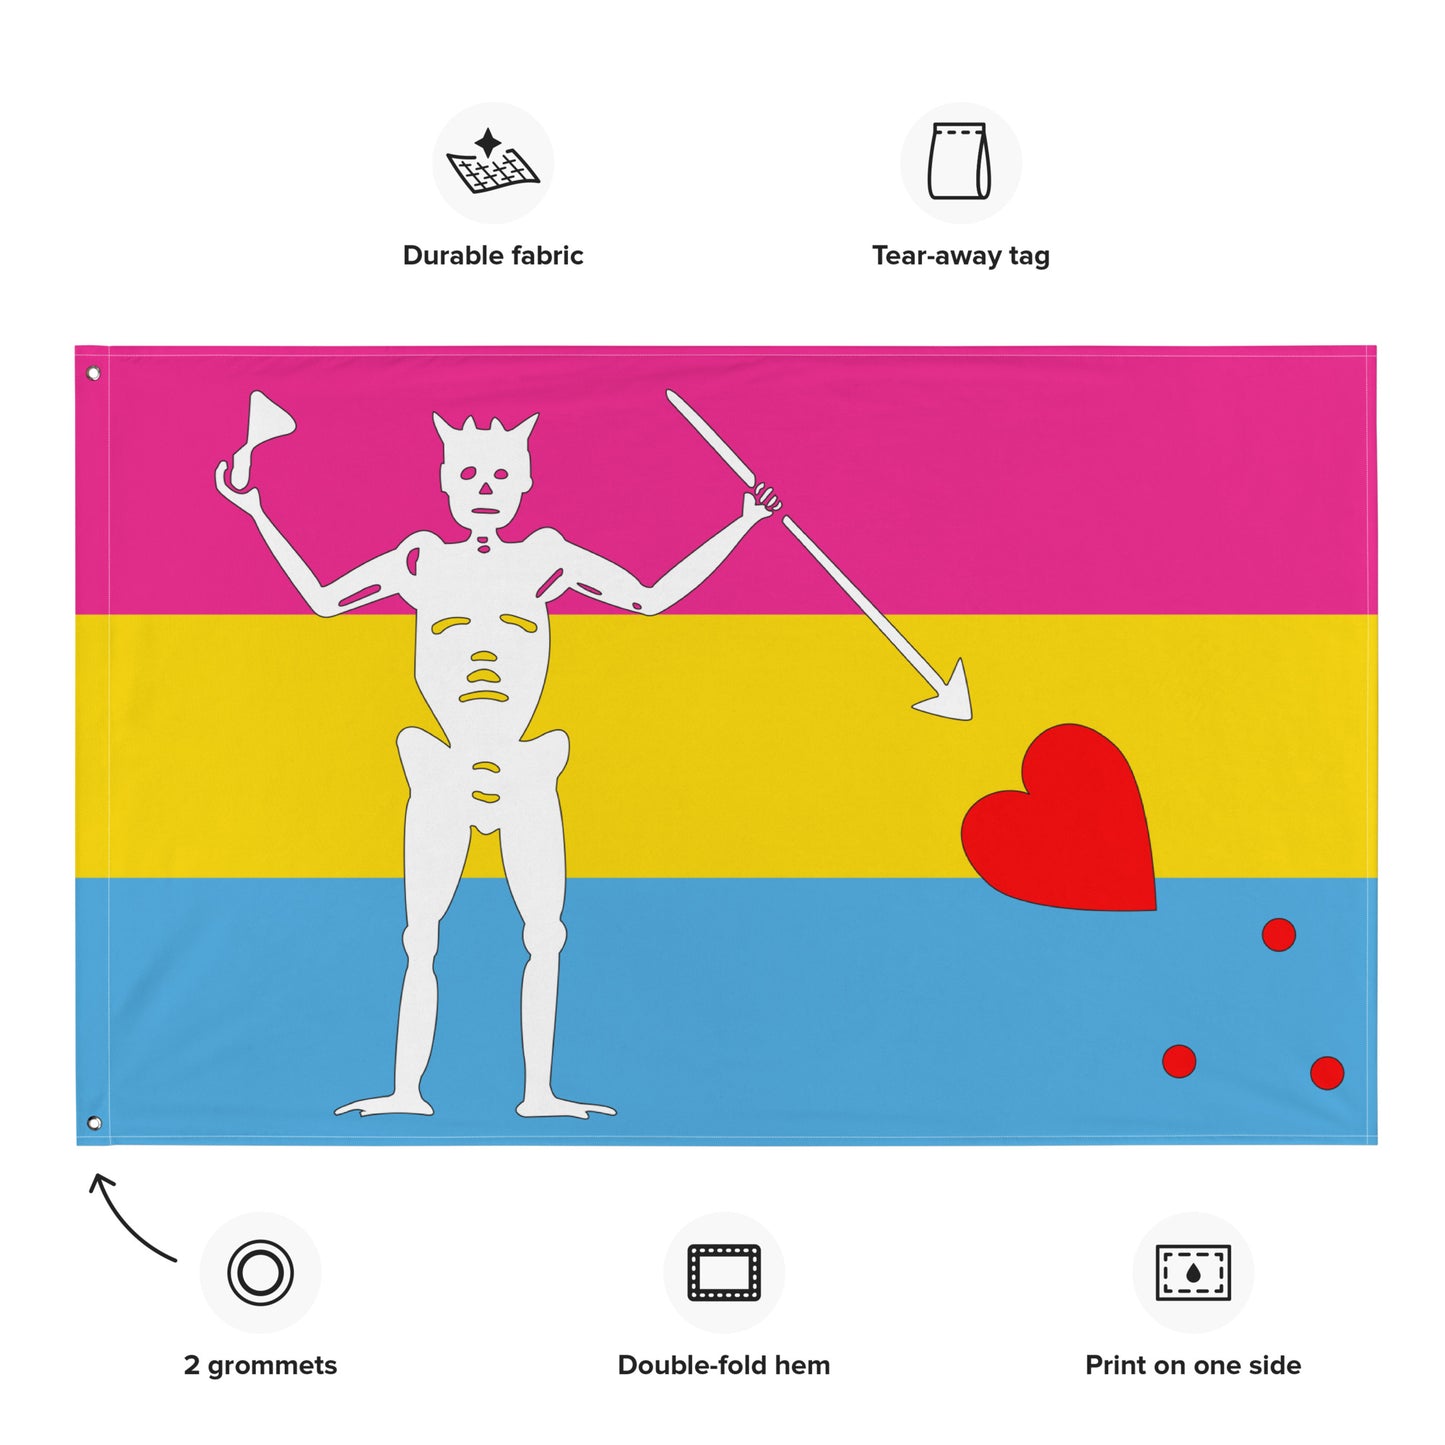 the pansexual flag with blackbeard's symbol surrounded by the specifications of "durable fabric, tear-away tag, 2 grommets, double-fold hem, print on one side"